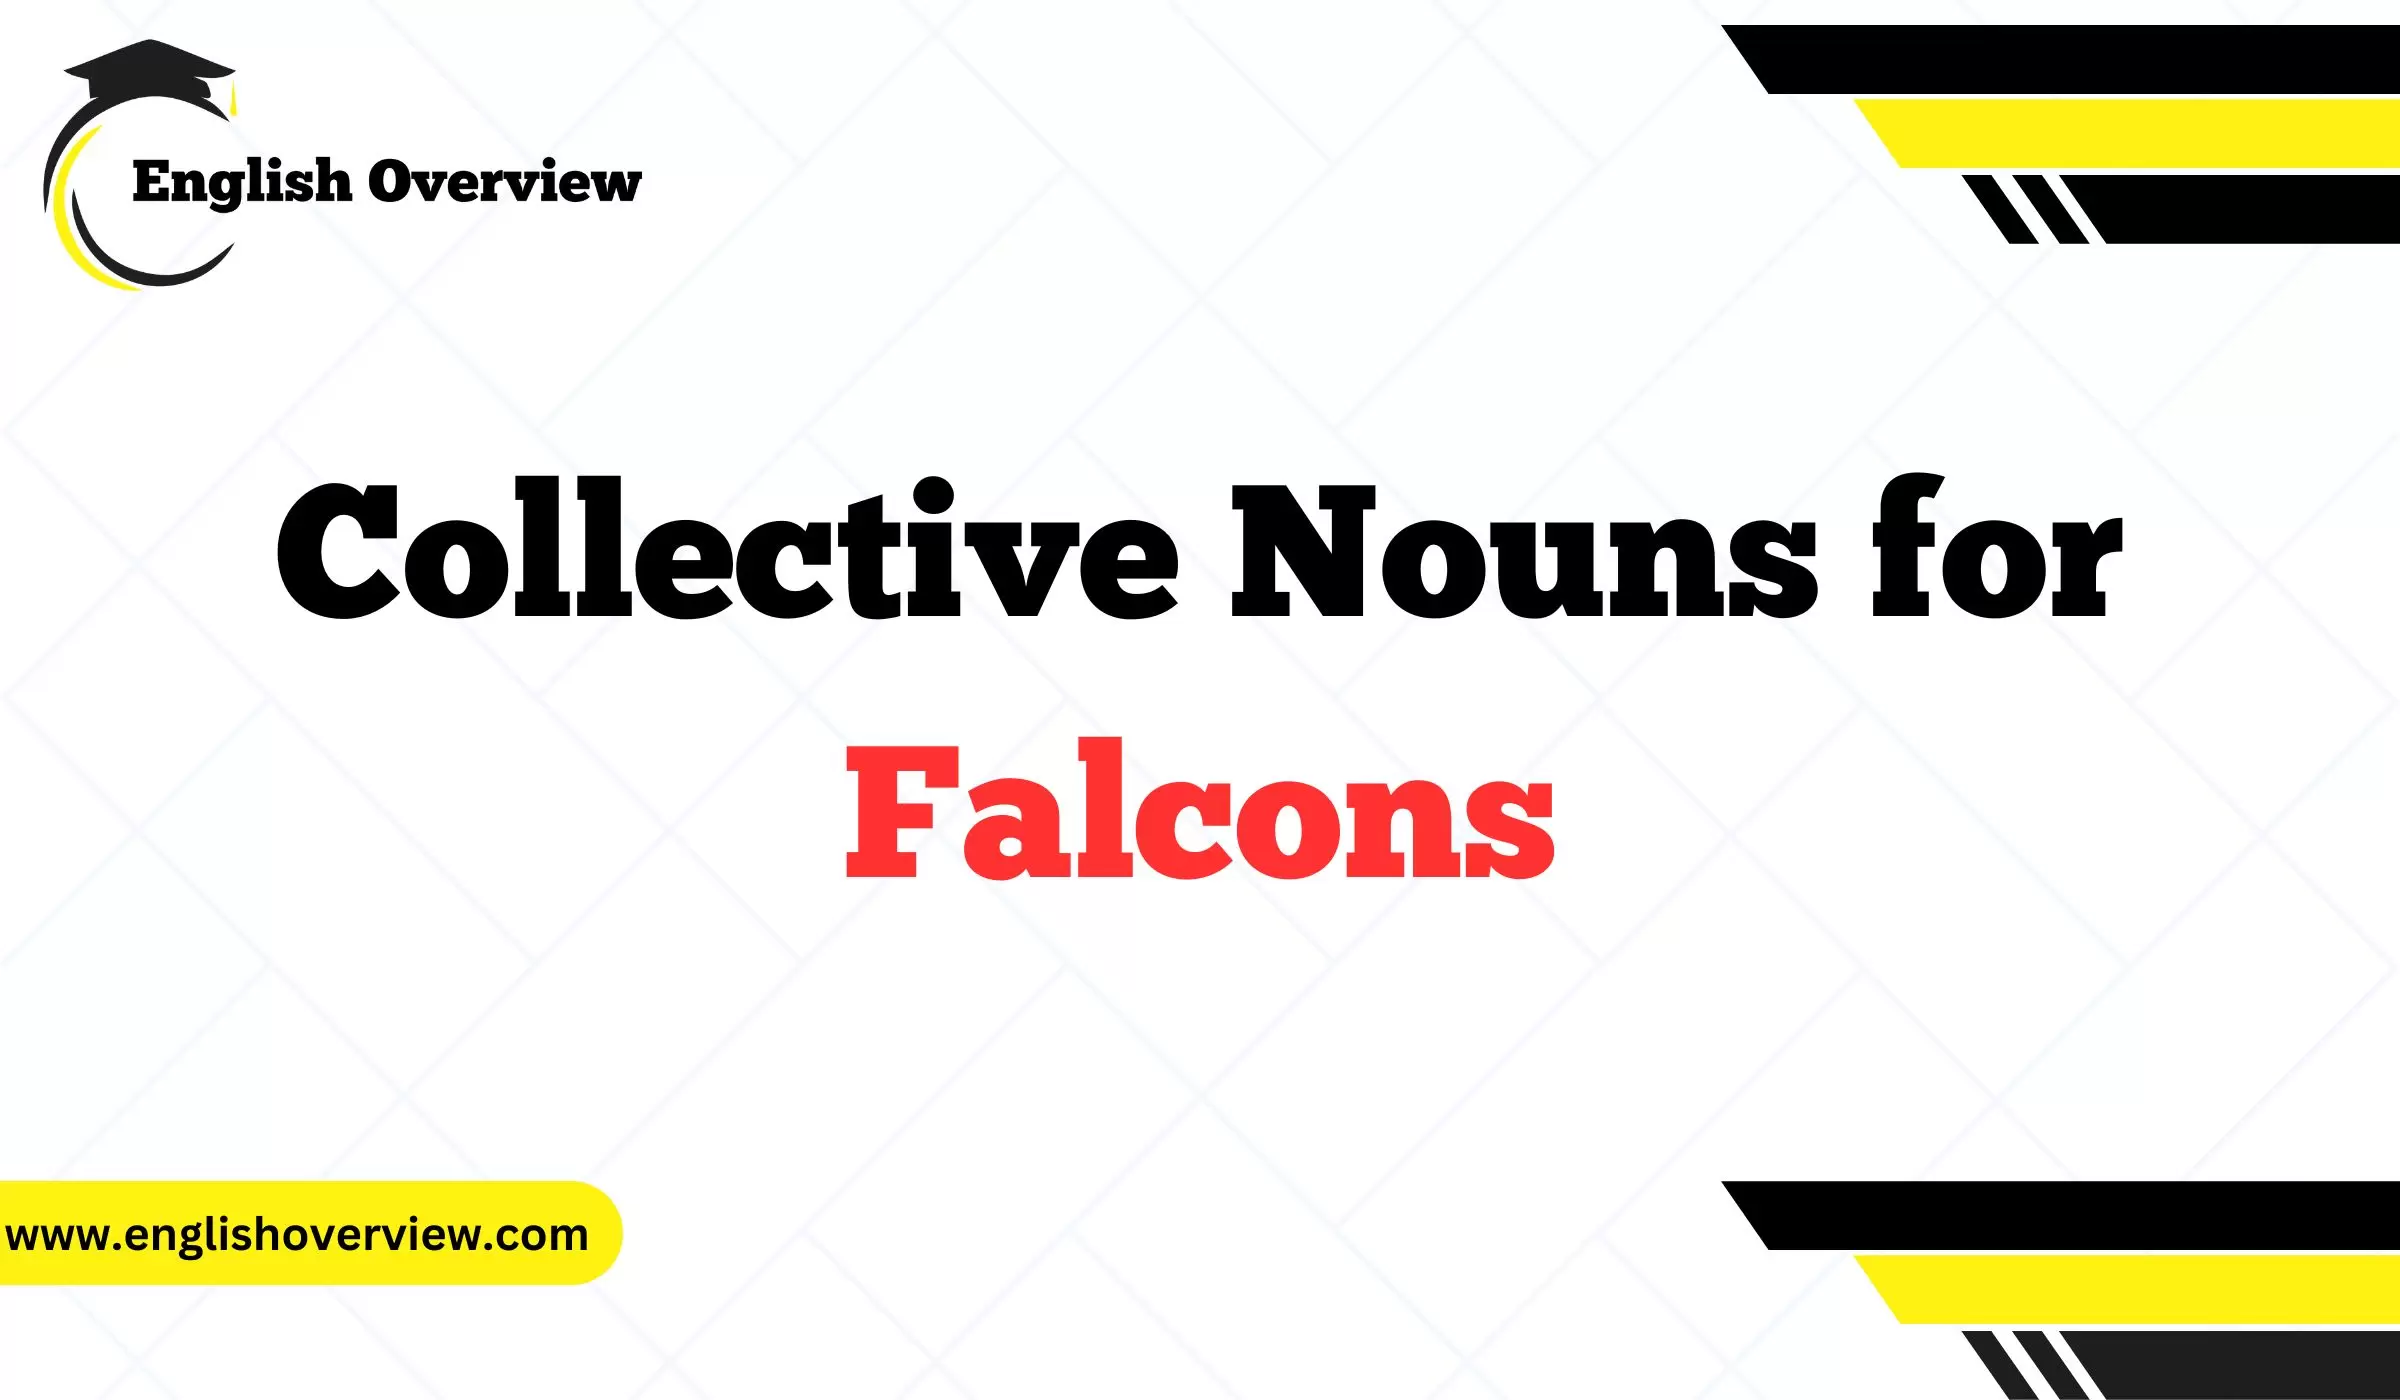 What is the Collective Nouns for Falcons